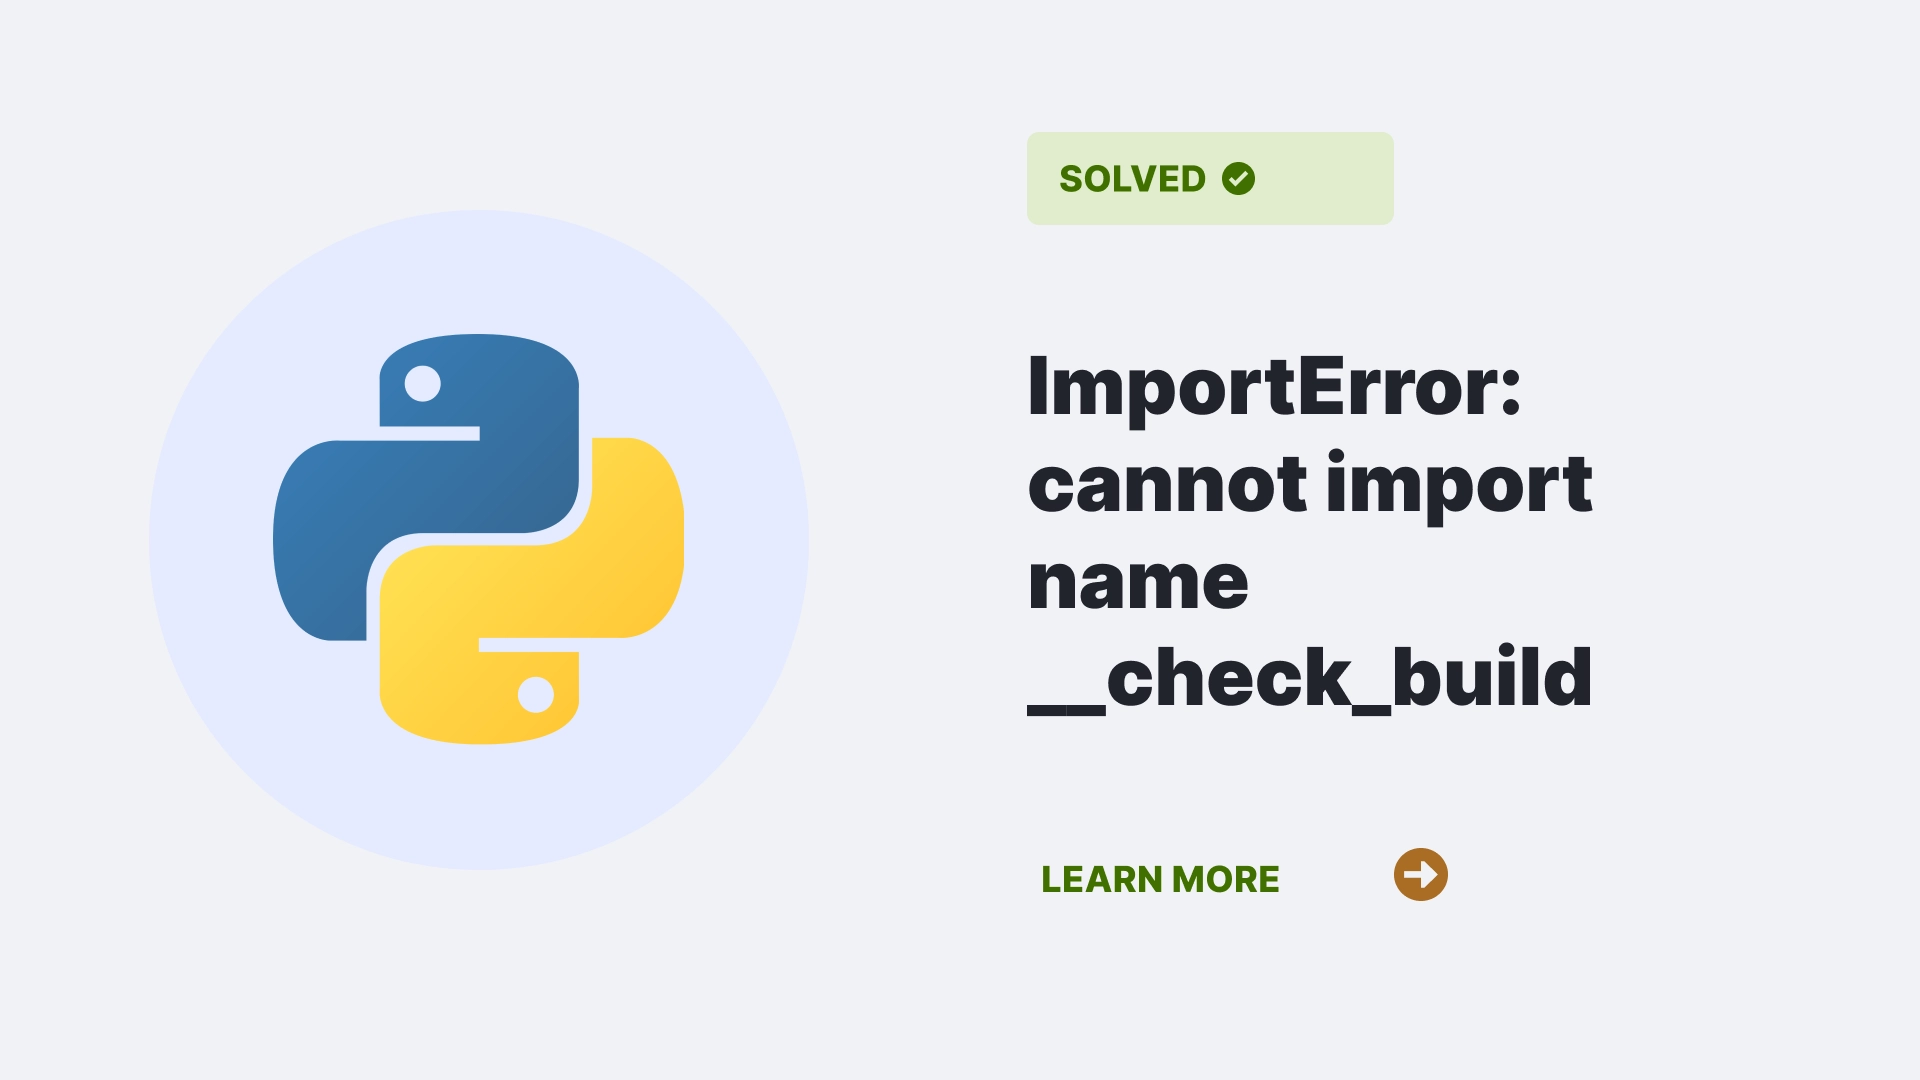 ImportError: cannot import name __check_build